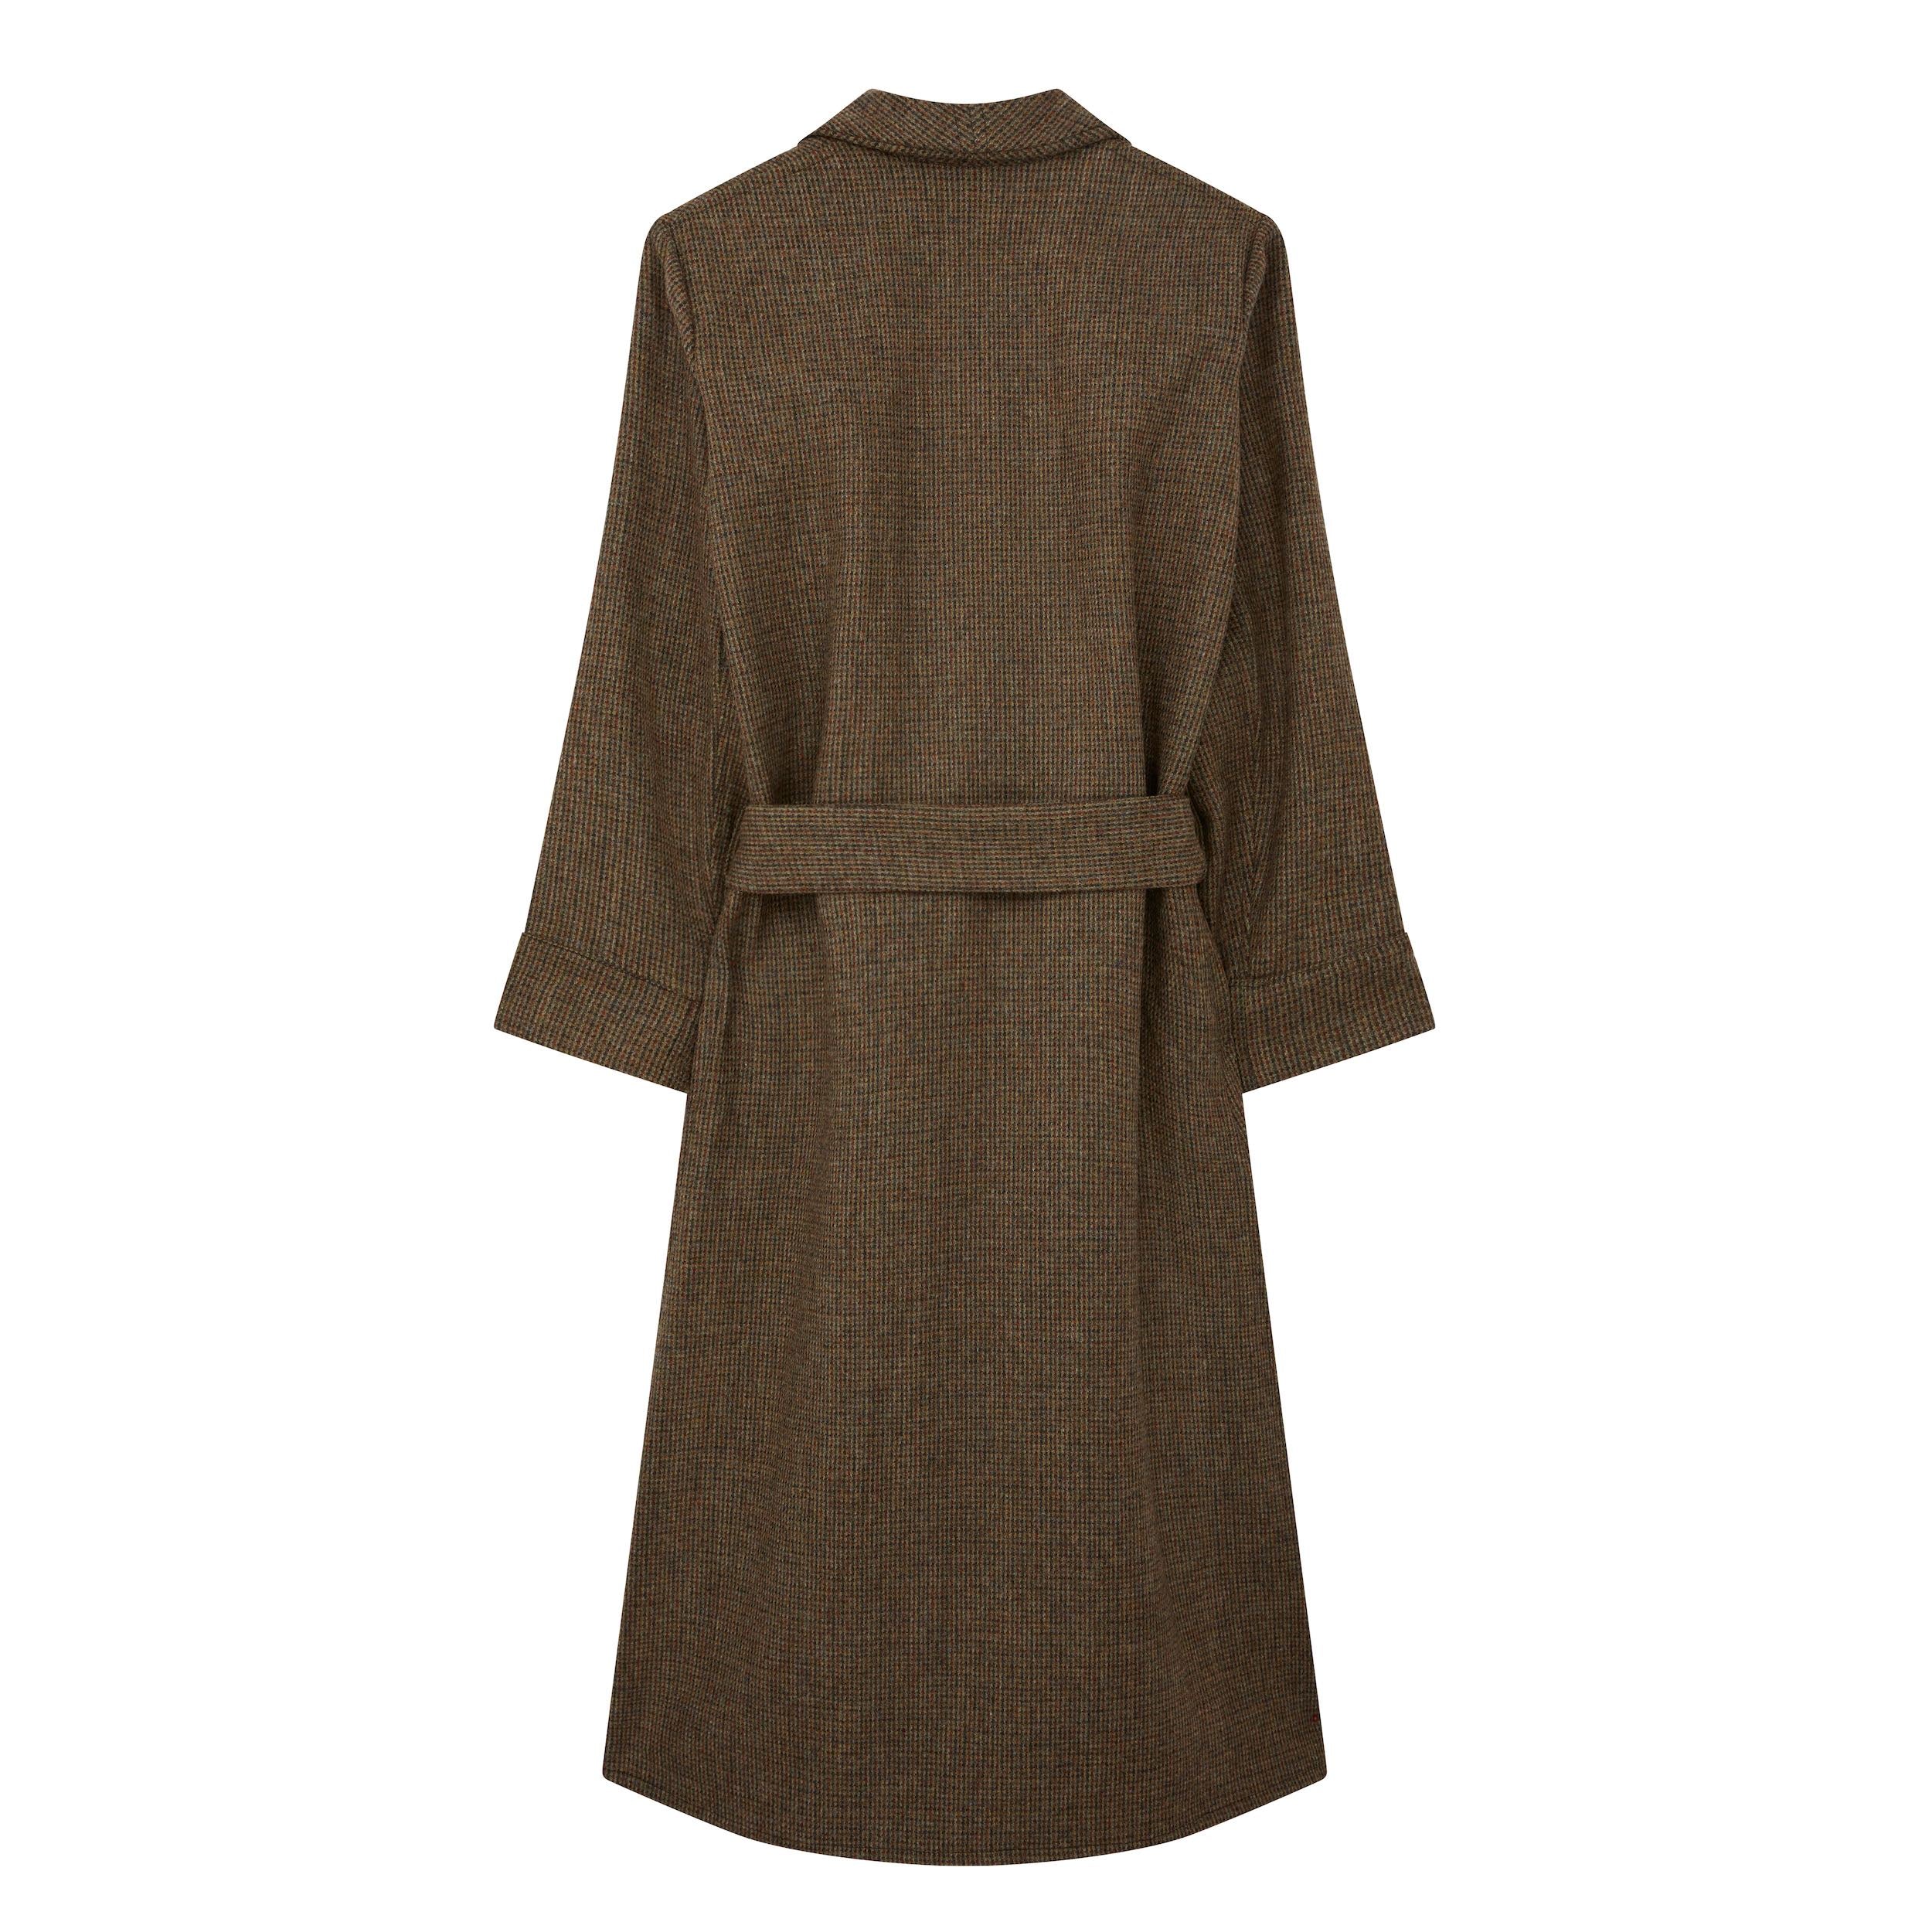 Carrier Company Wool Dressing Gown in Green Check